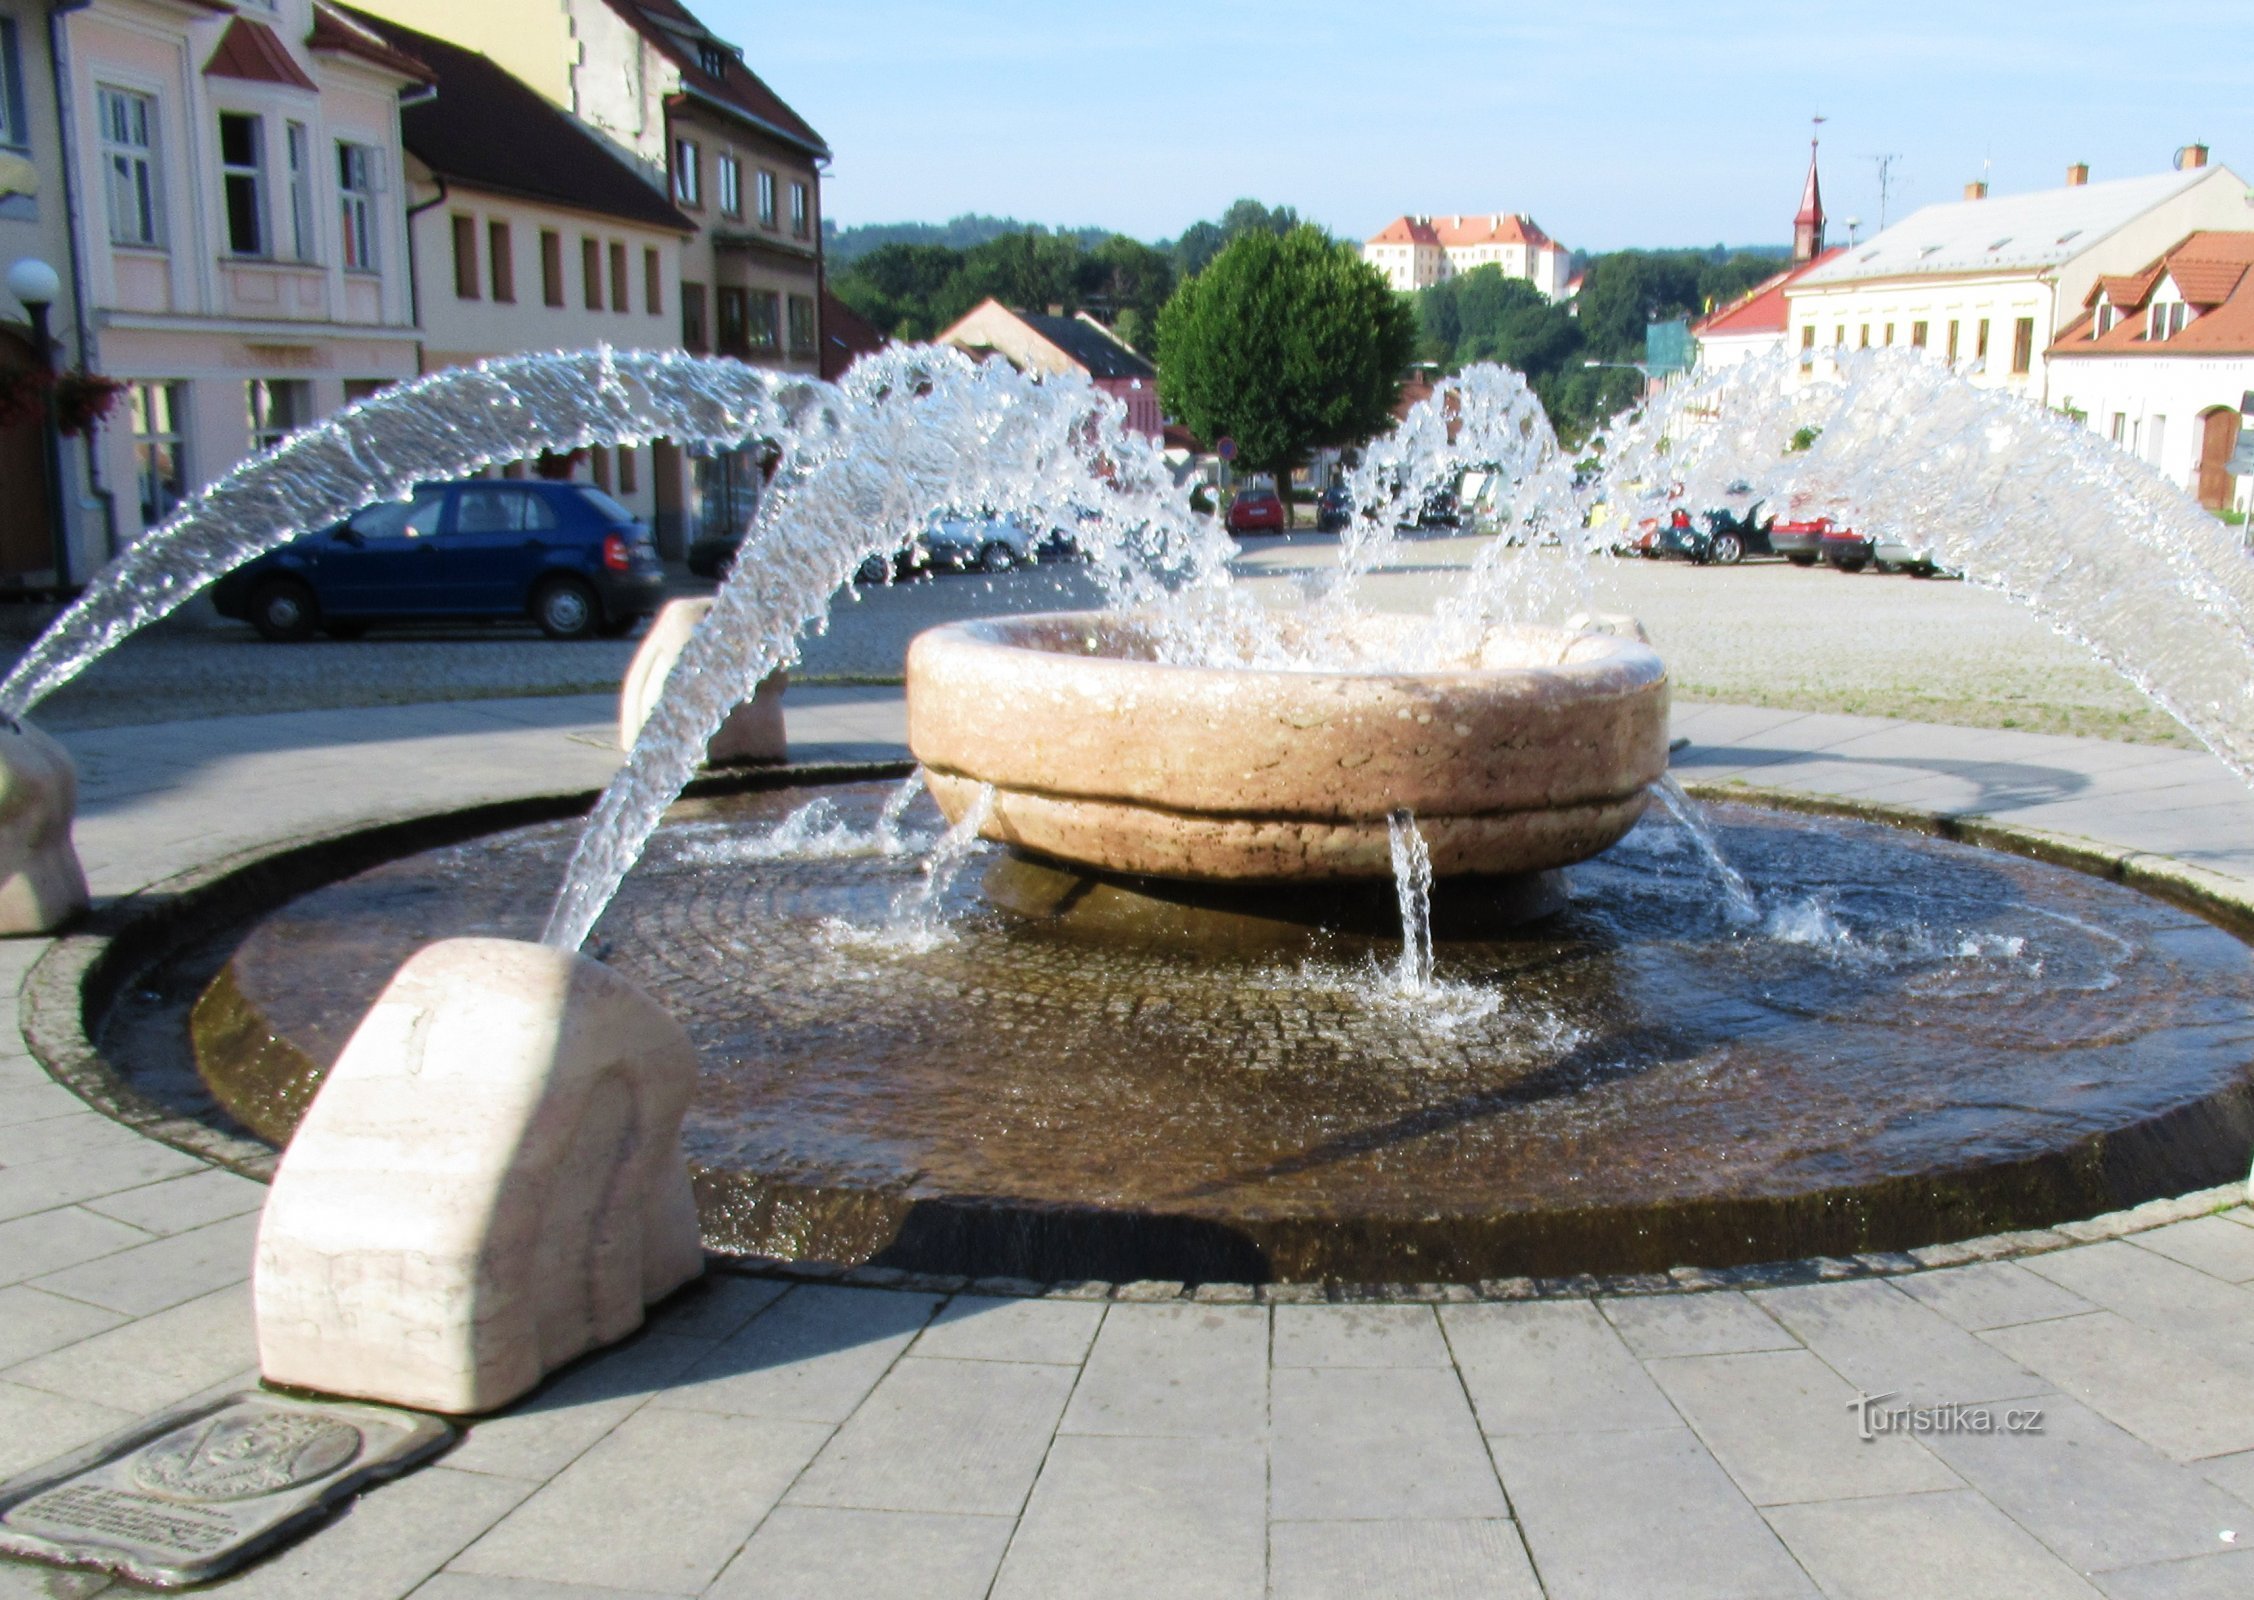 An unconventional fountain on King George Square in Kunštát